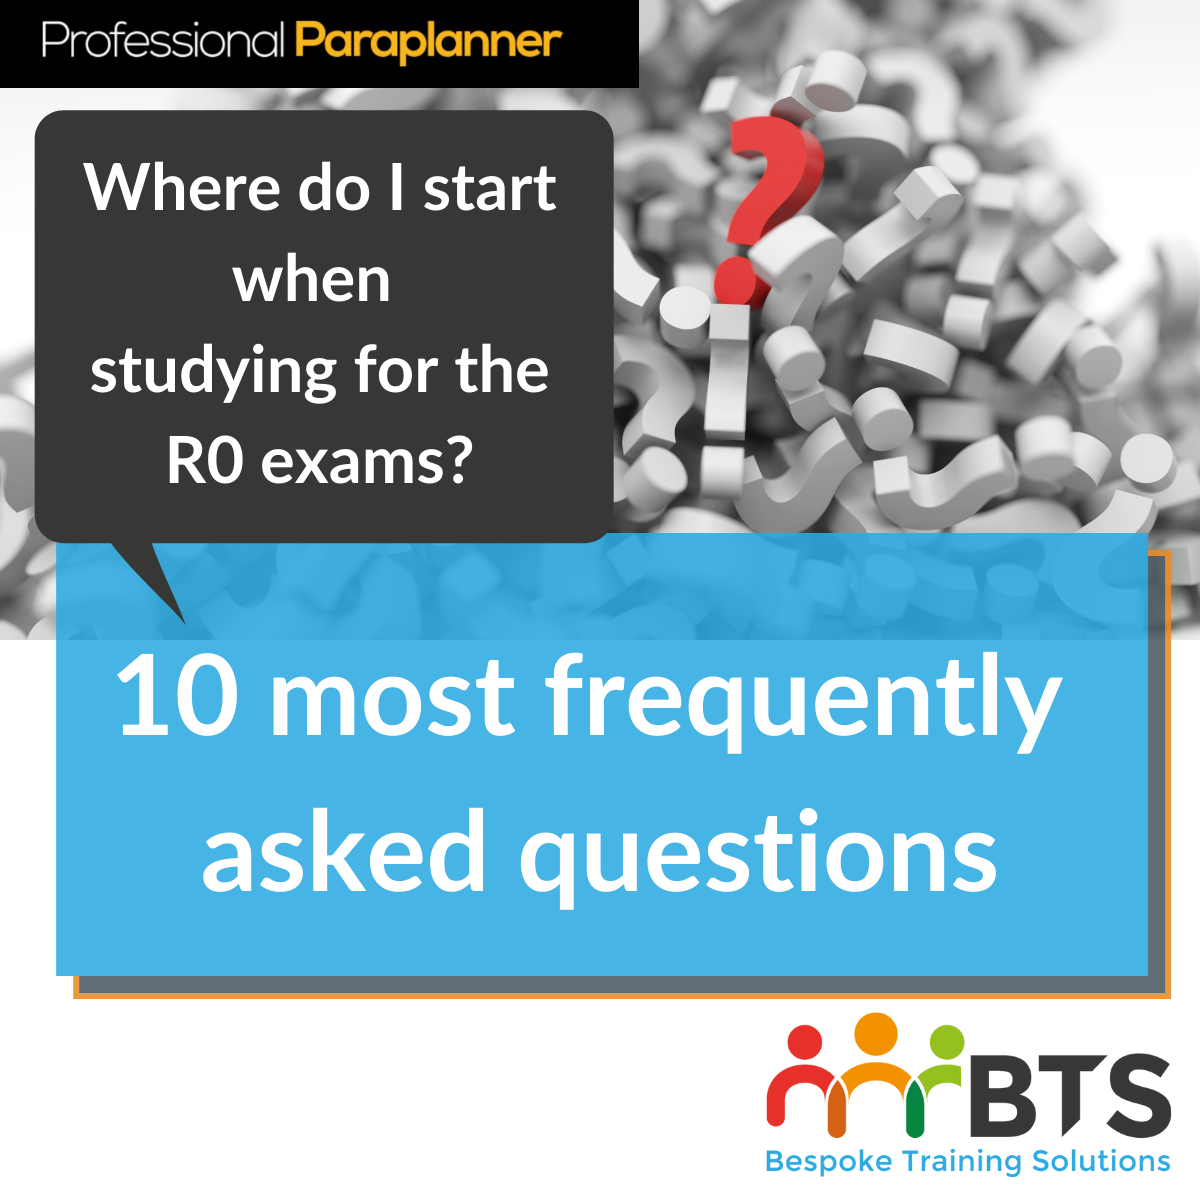 Images of question marks with the text, 10 most frequently asked questions about the R0 exams